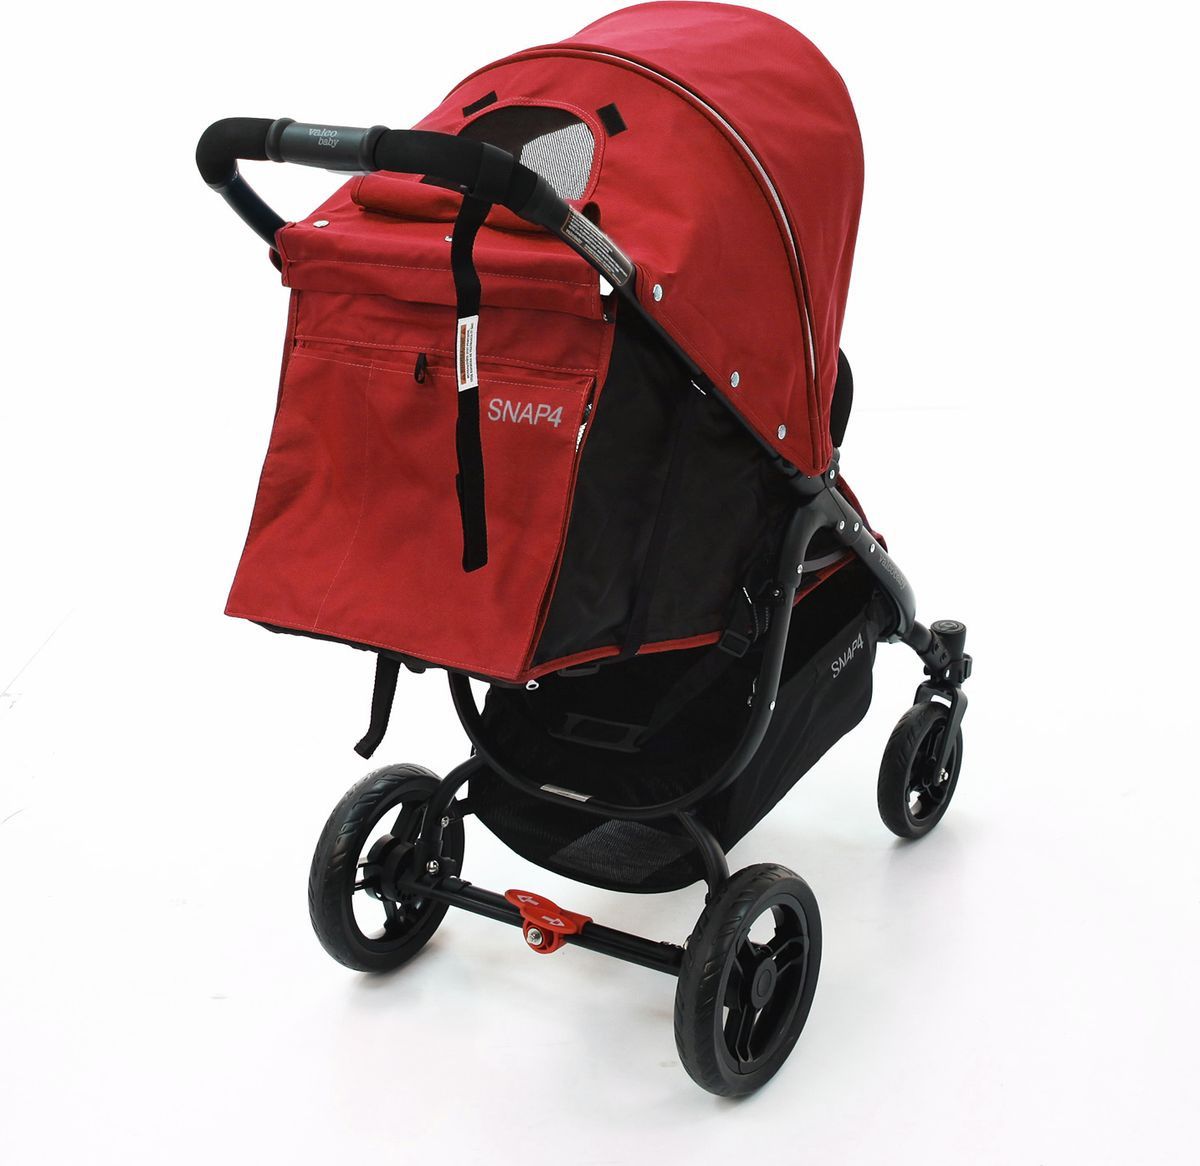   Valco Baby Snap 4 Fire red